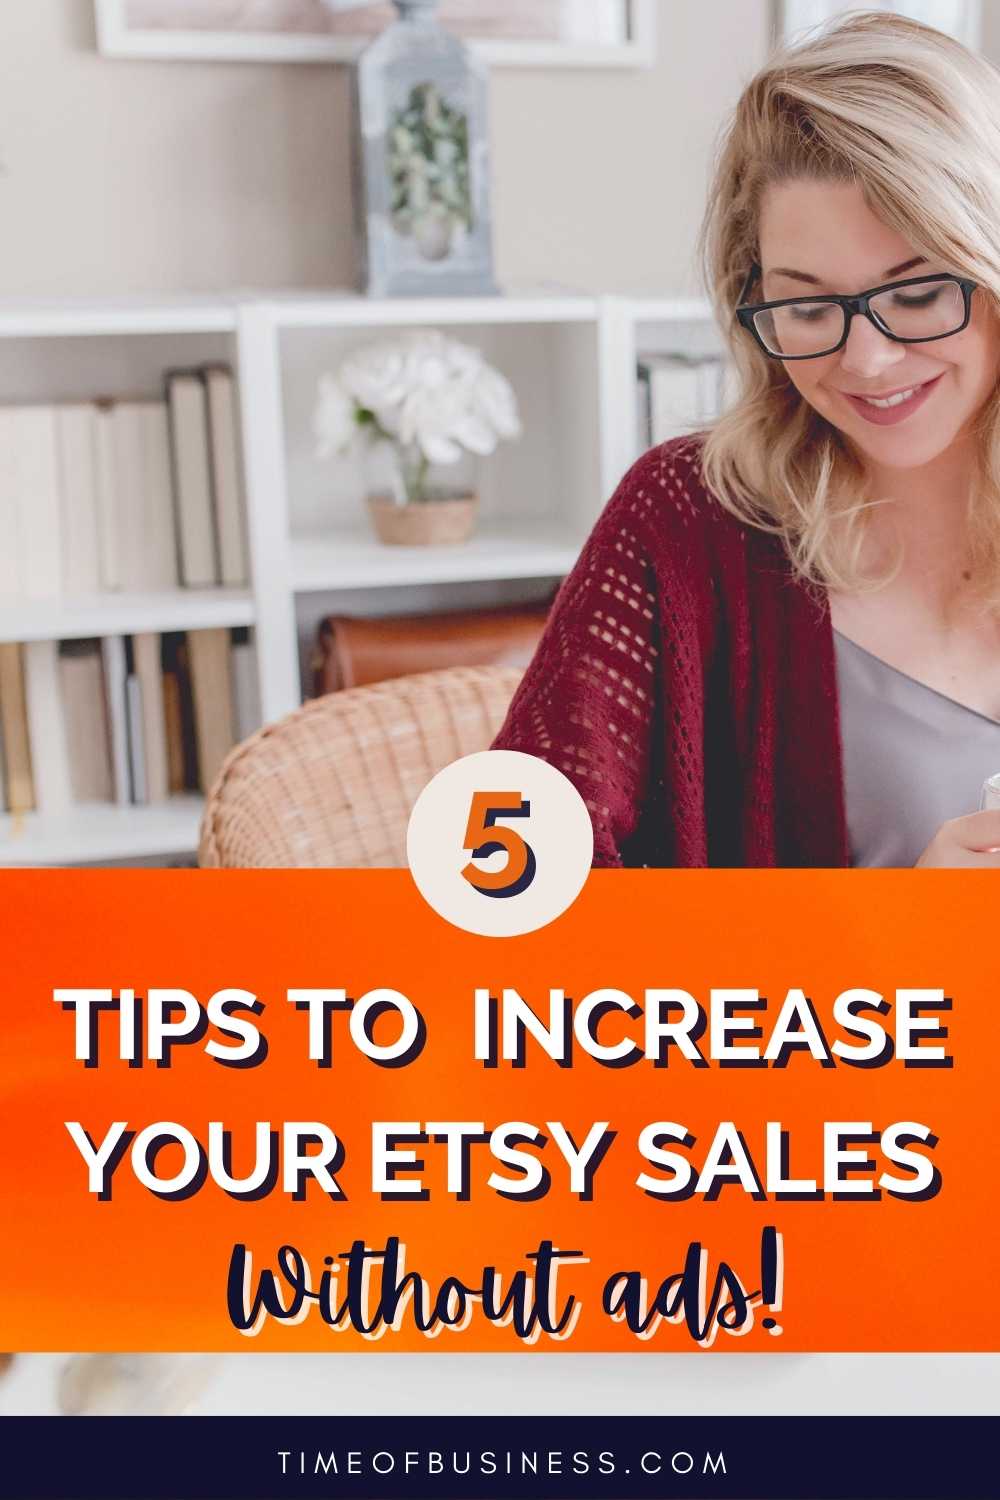 5 tips to increase your Etsy sales without ads